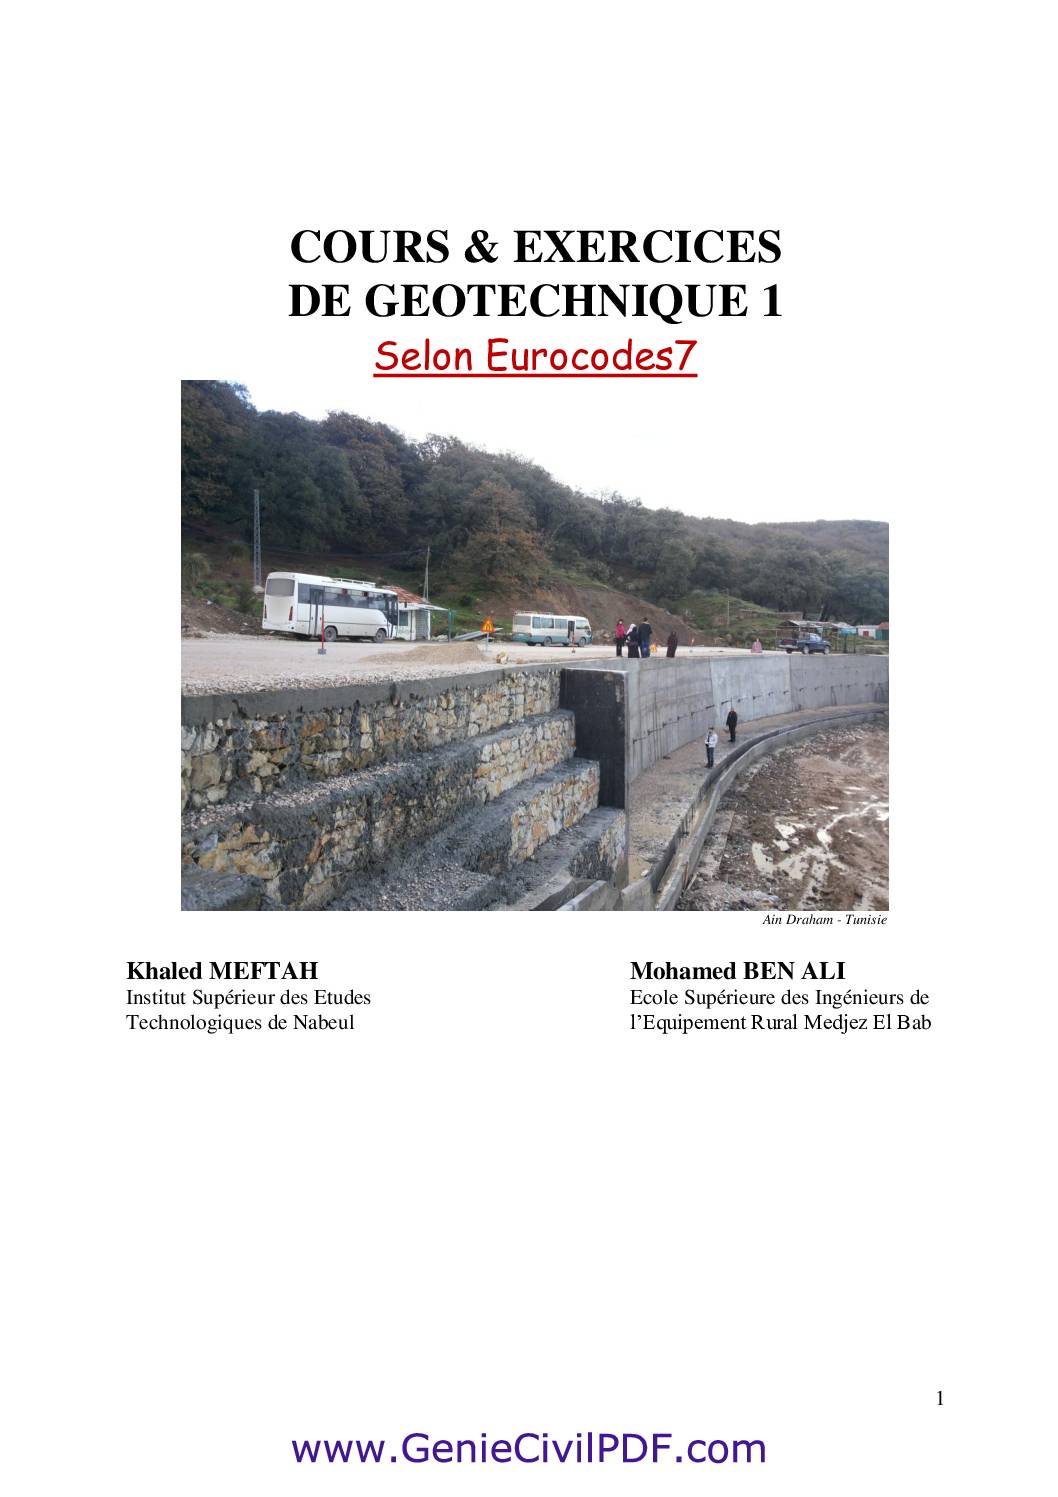 Cours exercices geotechnique